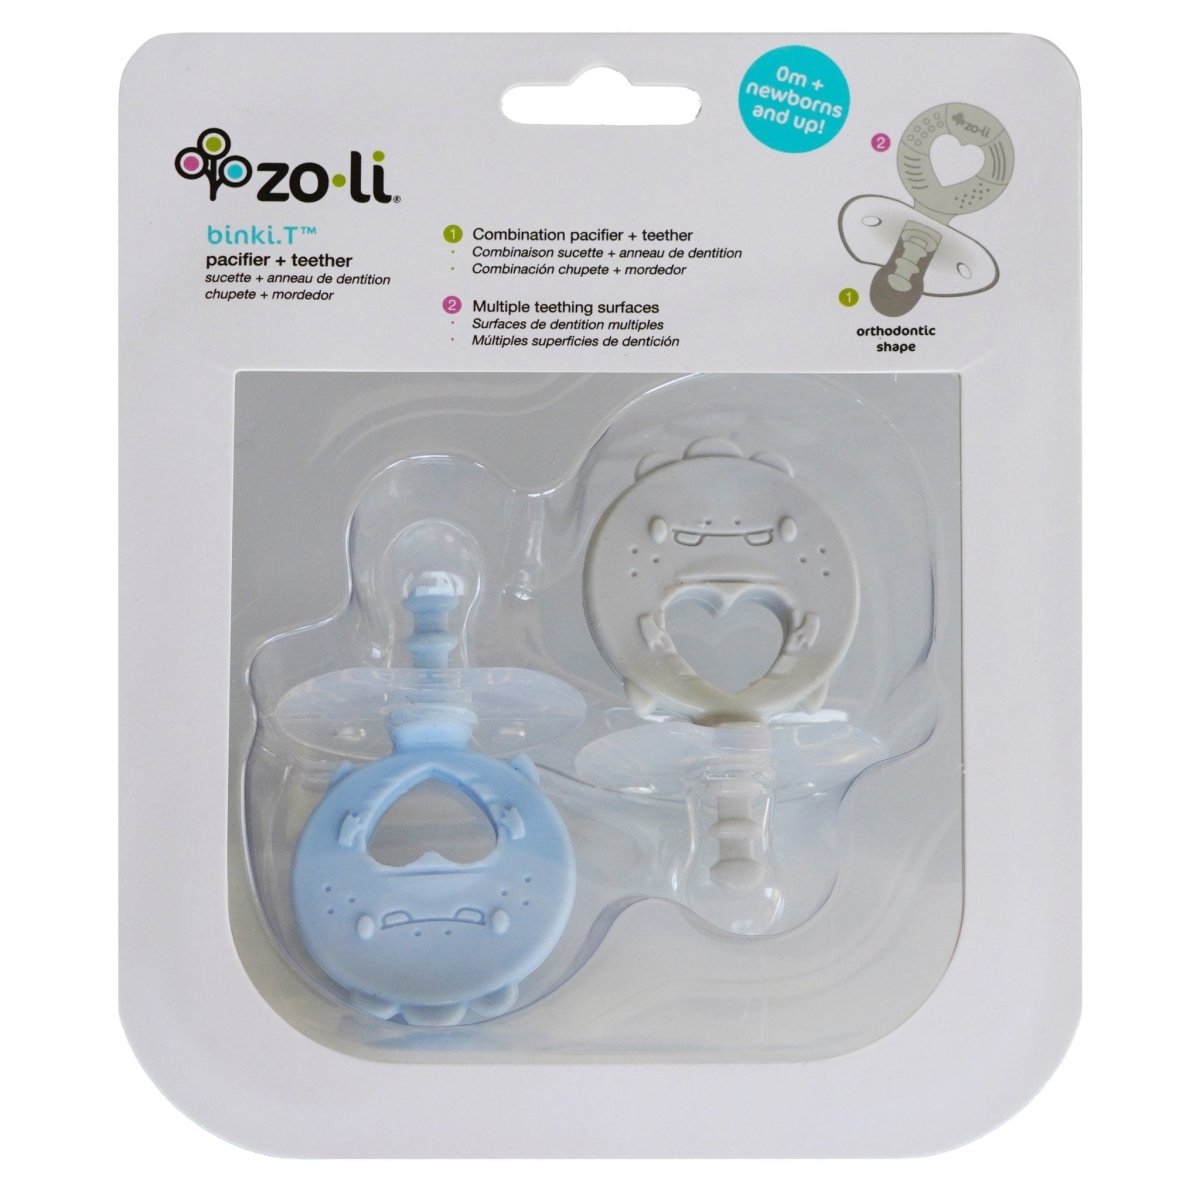 ZoLi BINKI.T Pacifier + Teether Combination Dino(Pack of 2) - Mist Blue/Ash - BF19PTMD01